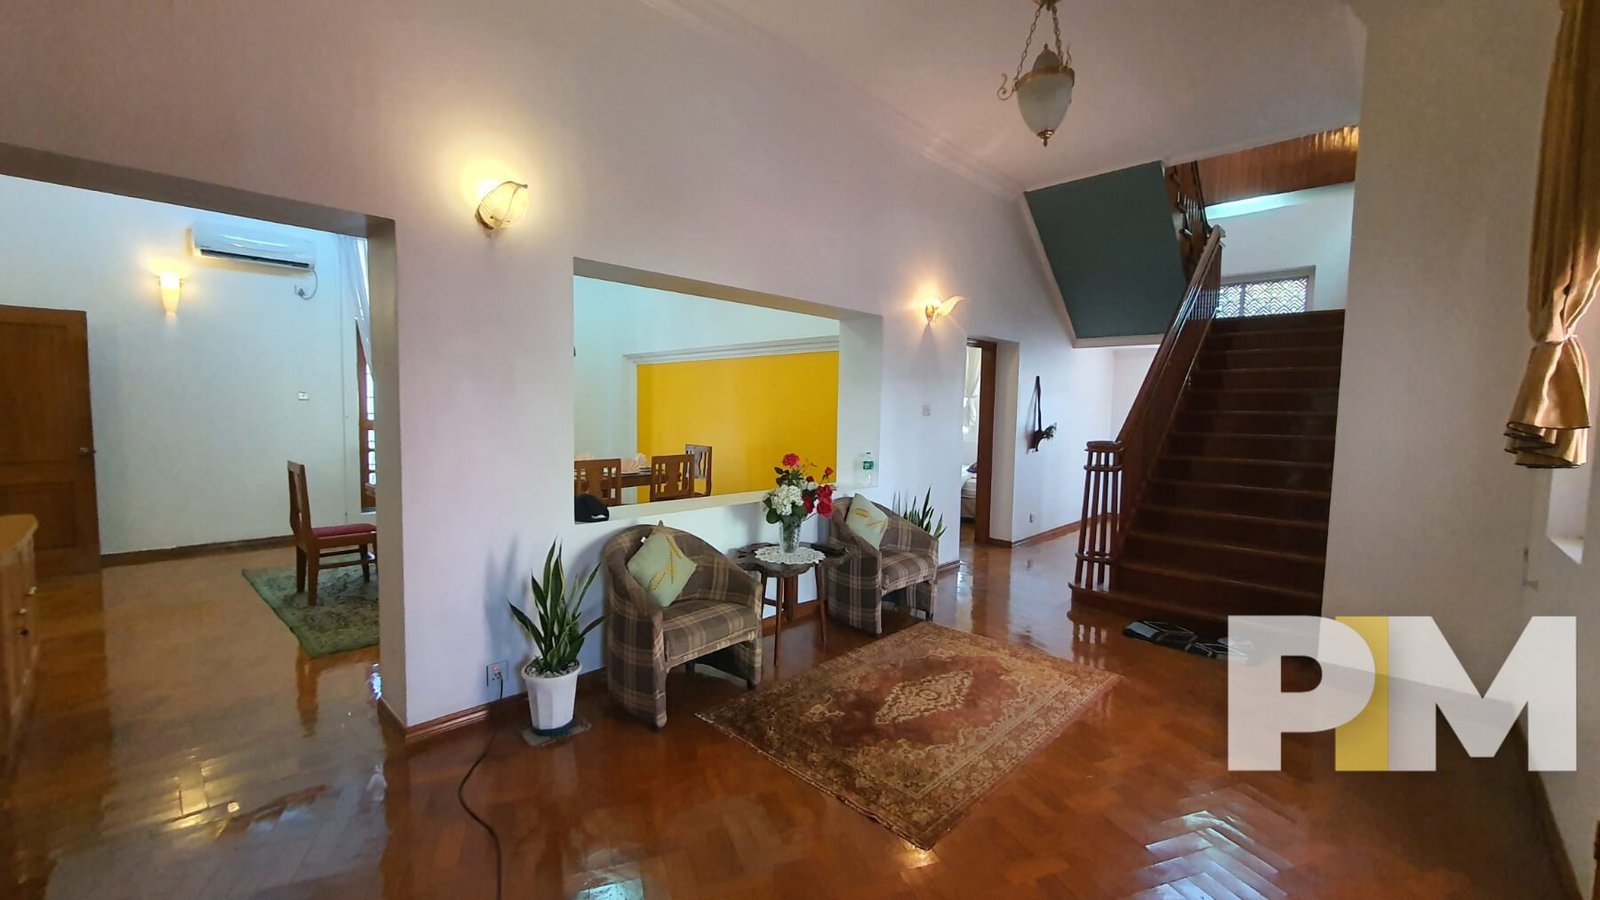 living room with staircase - Yangon Property